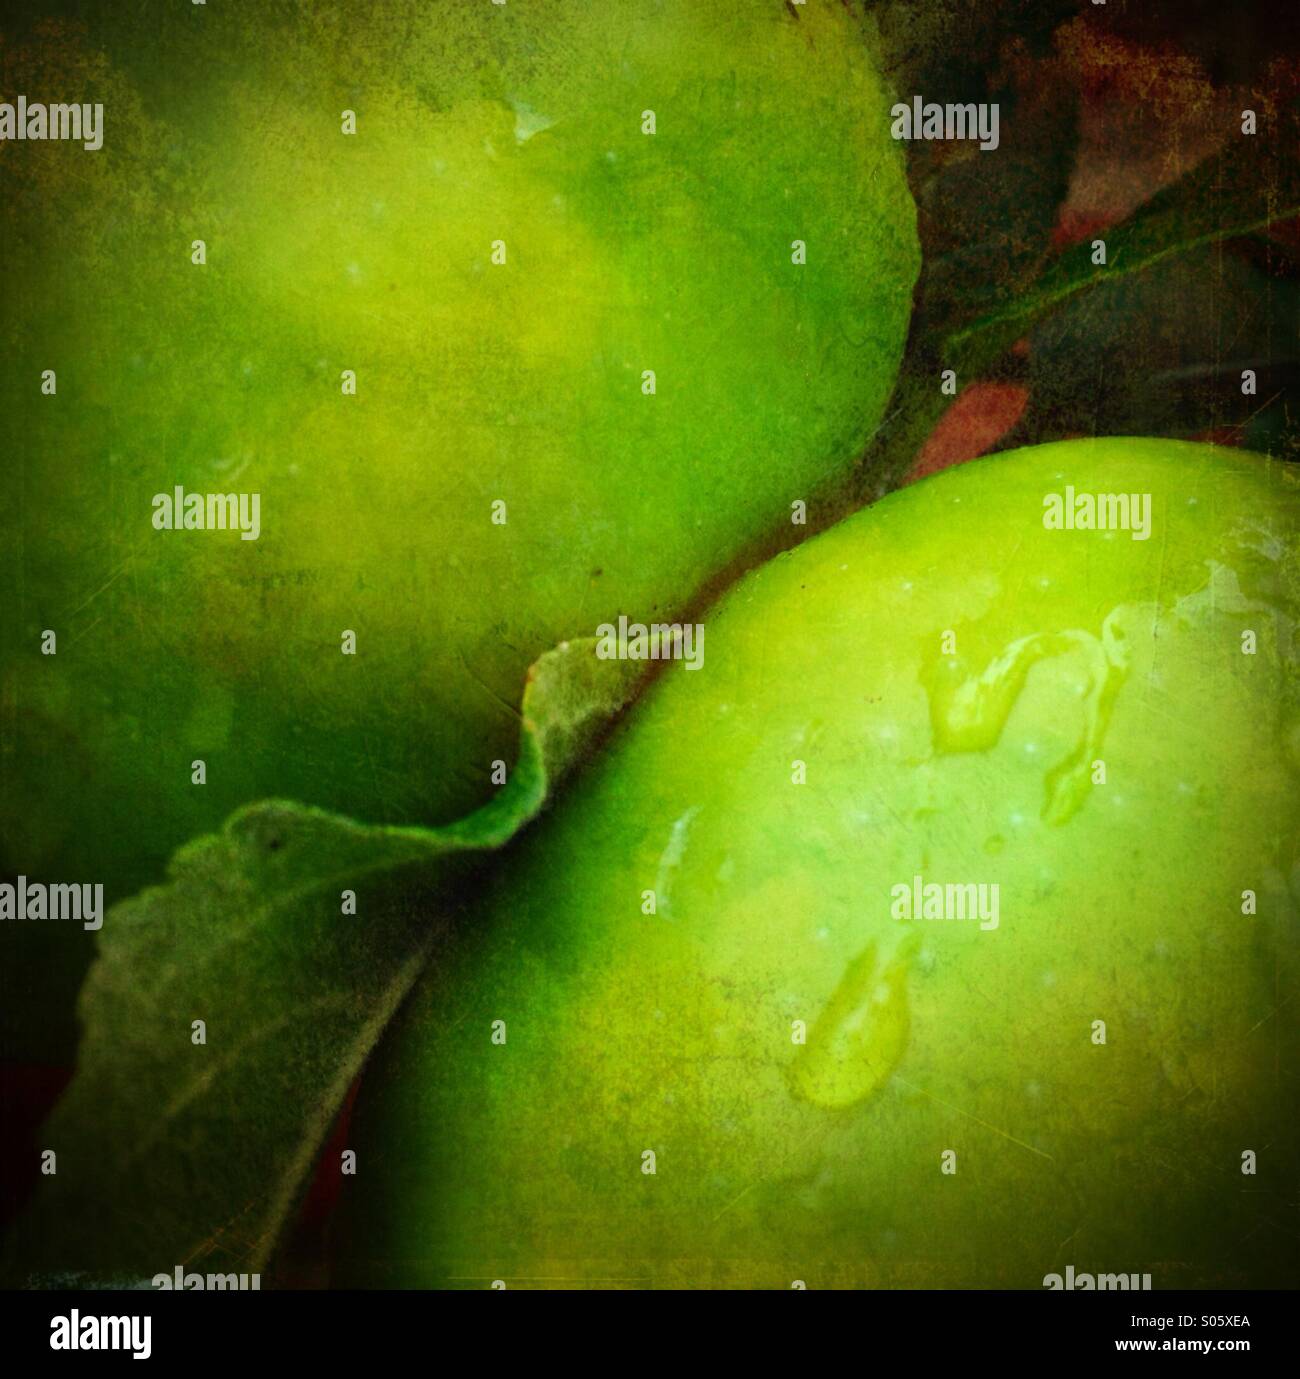 Two apples covered with rain drops Stock Photo